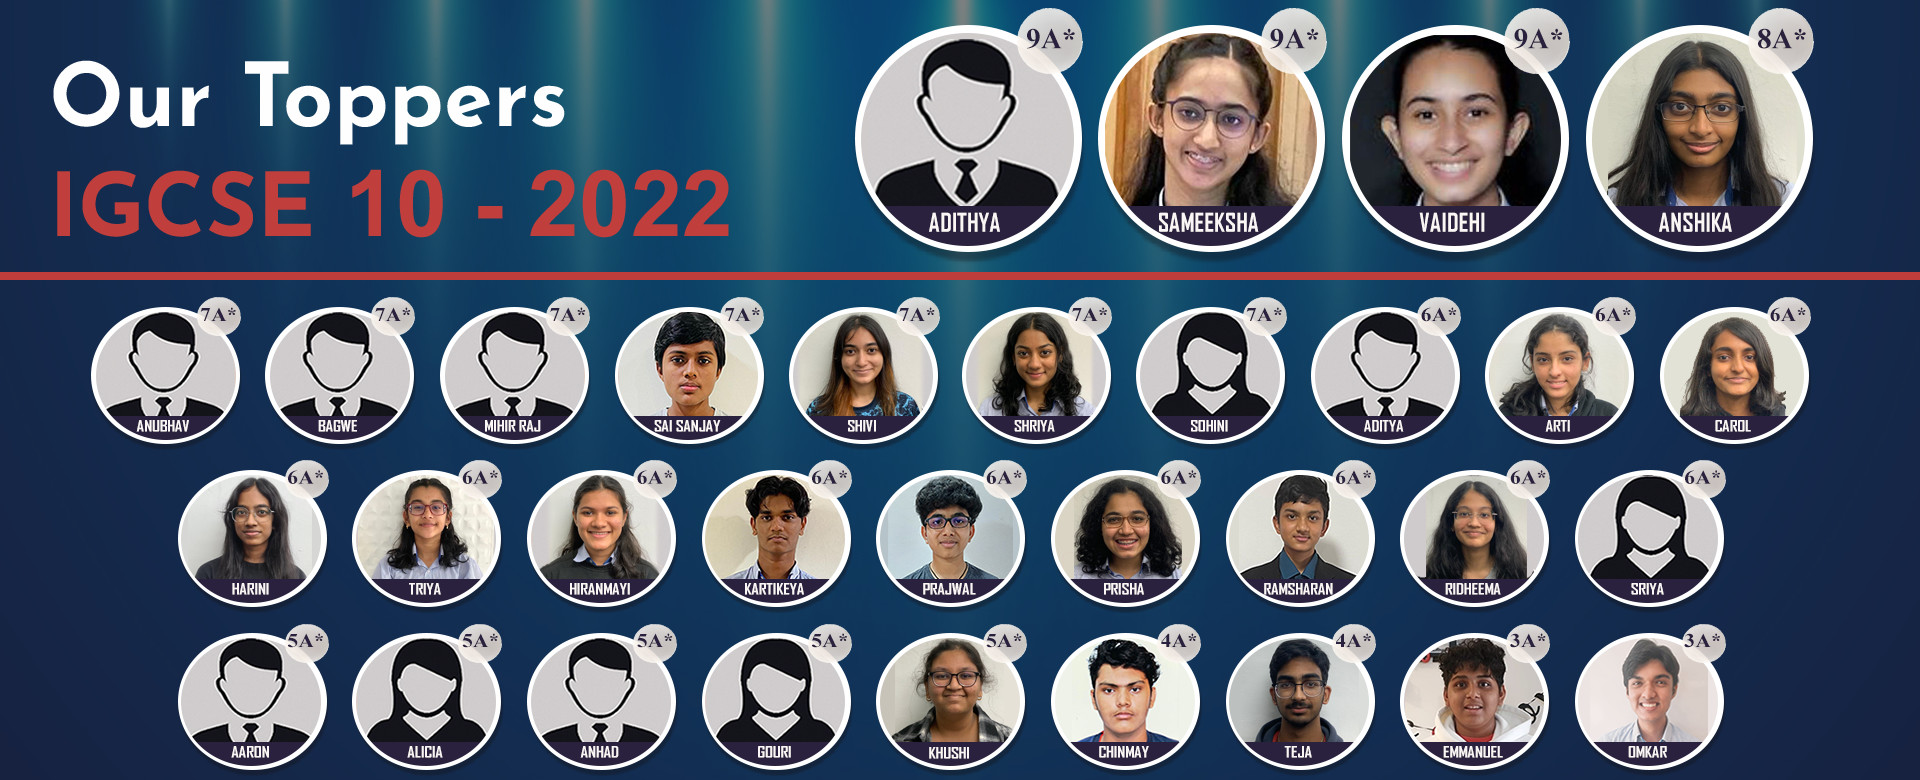 Our 2022 IGCSE 10 Toppers